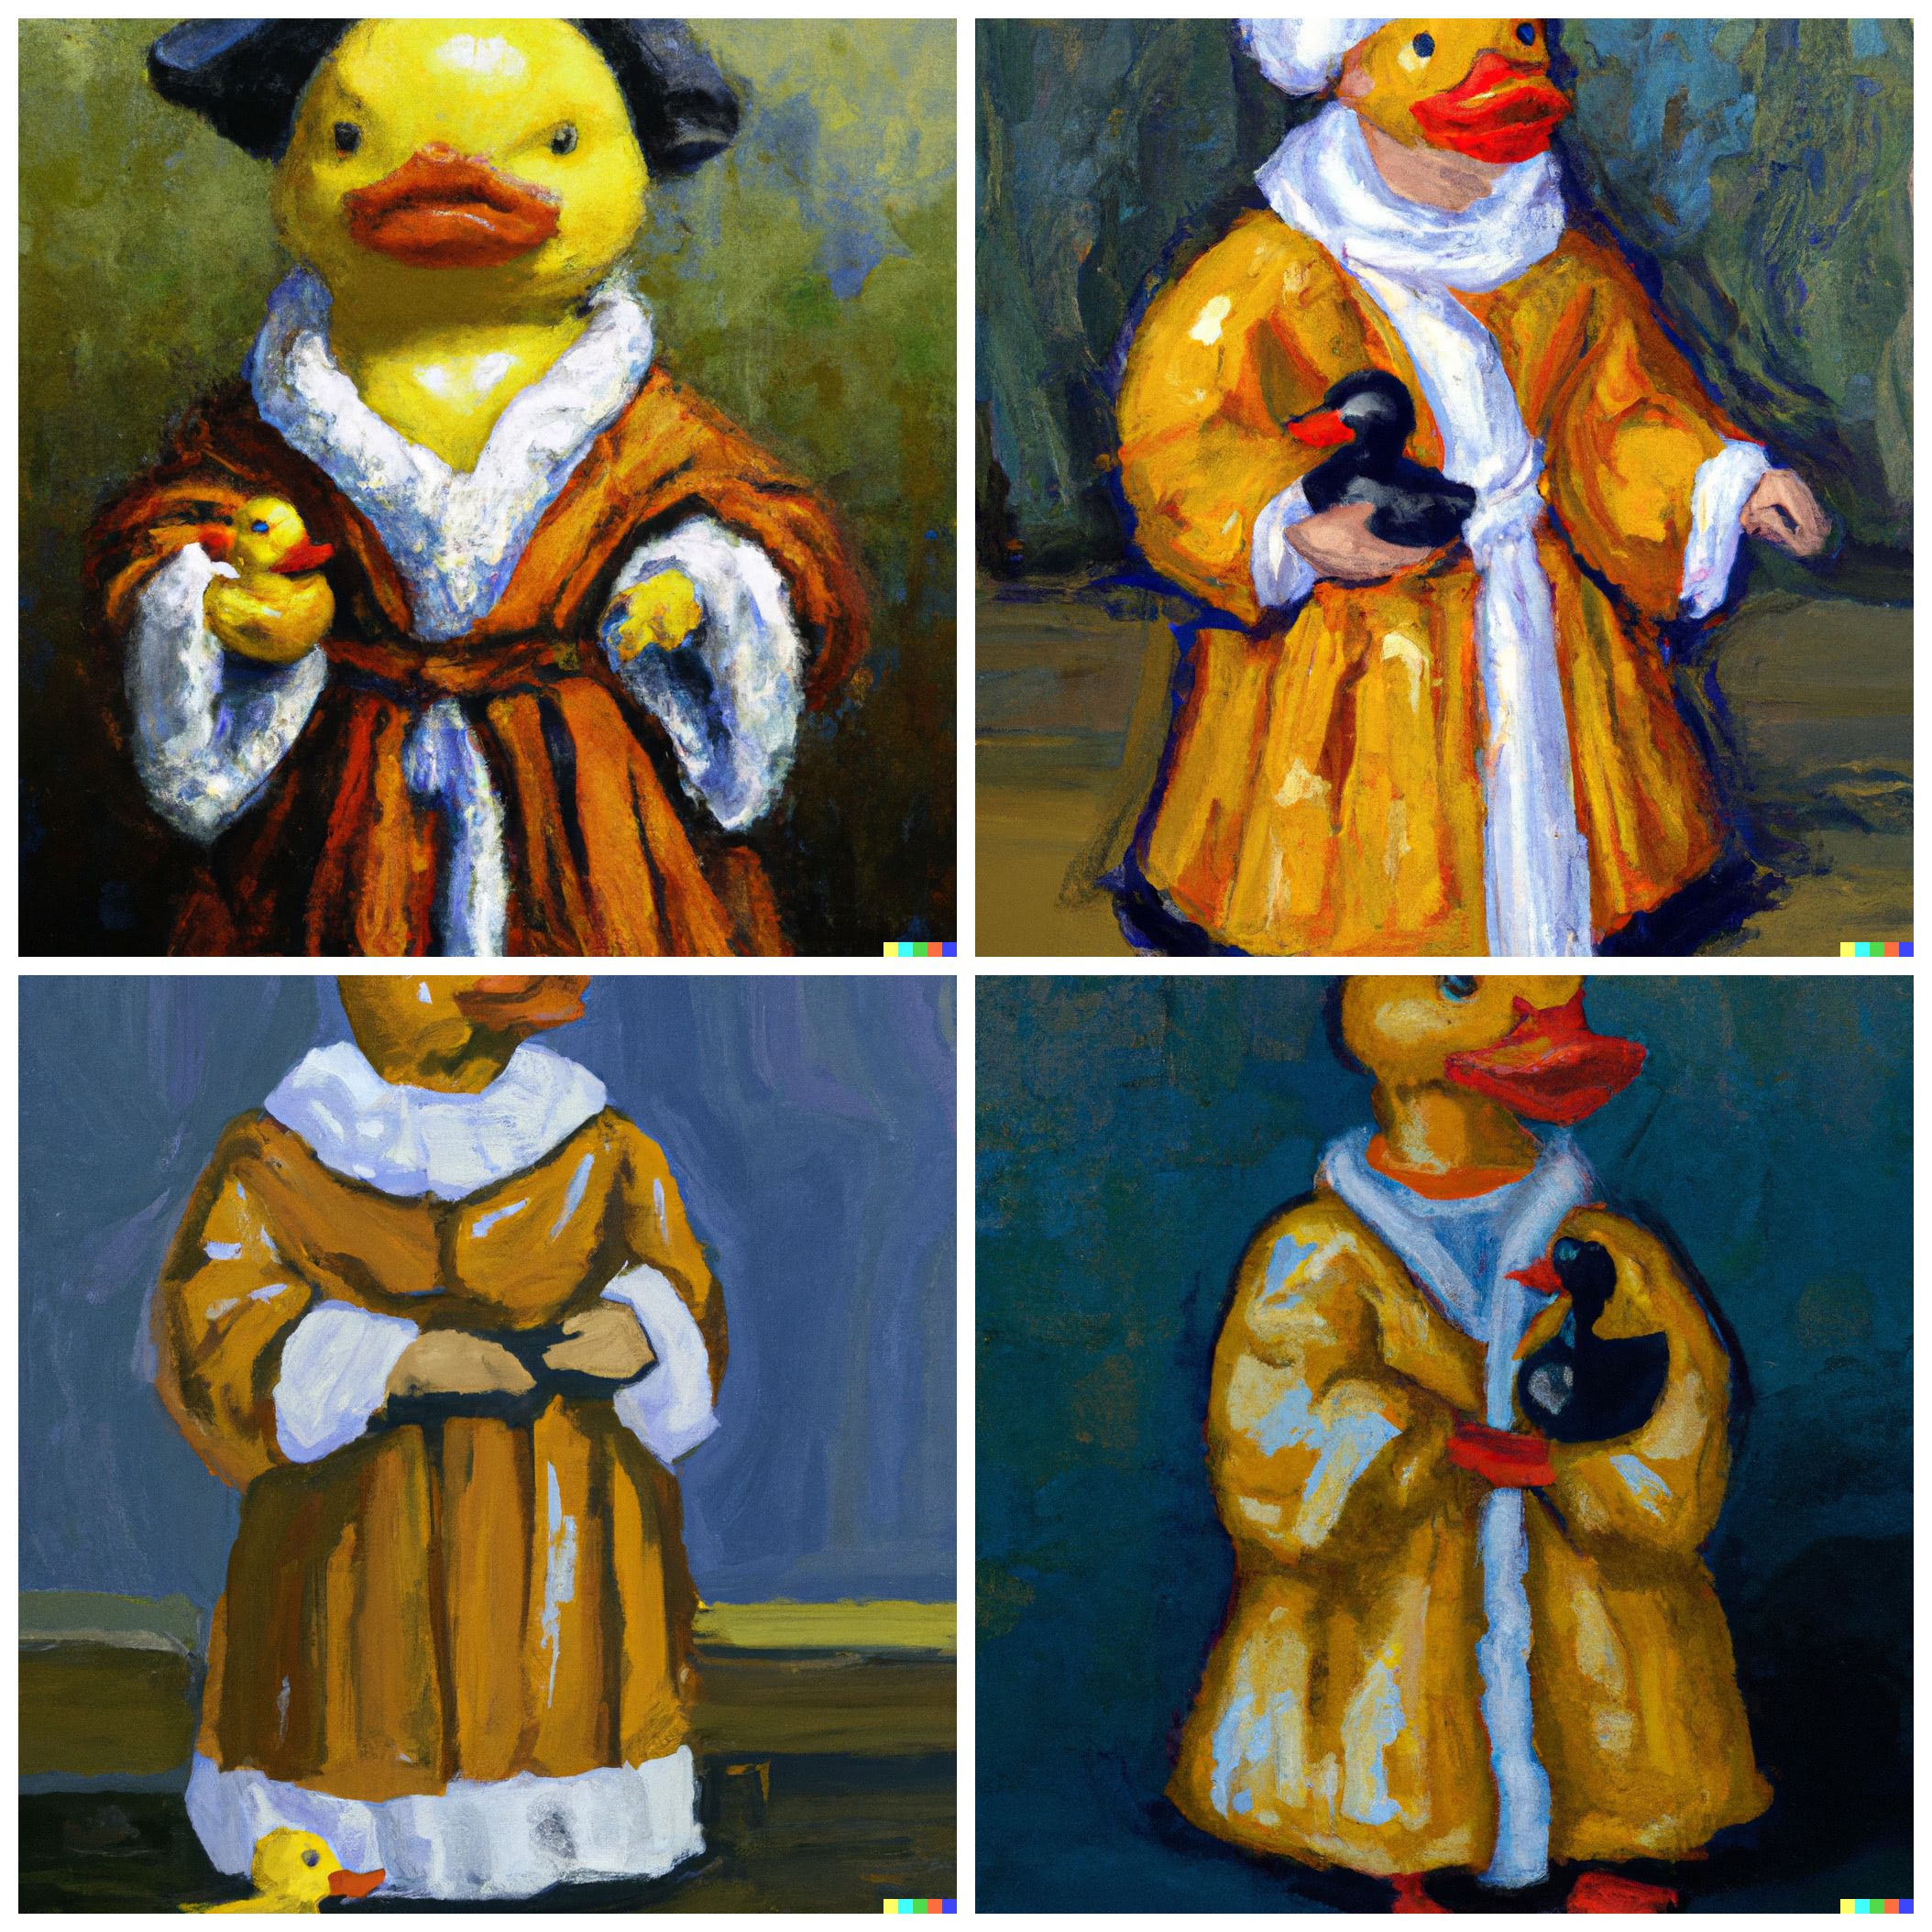 An oil painting of a rubber duck wearing medieval robe by Van Gogh